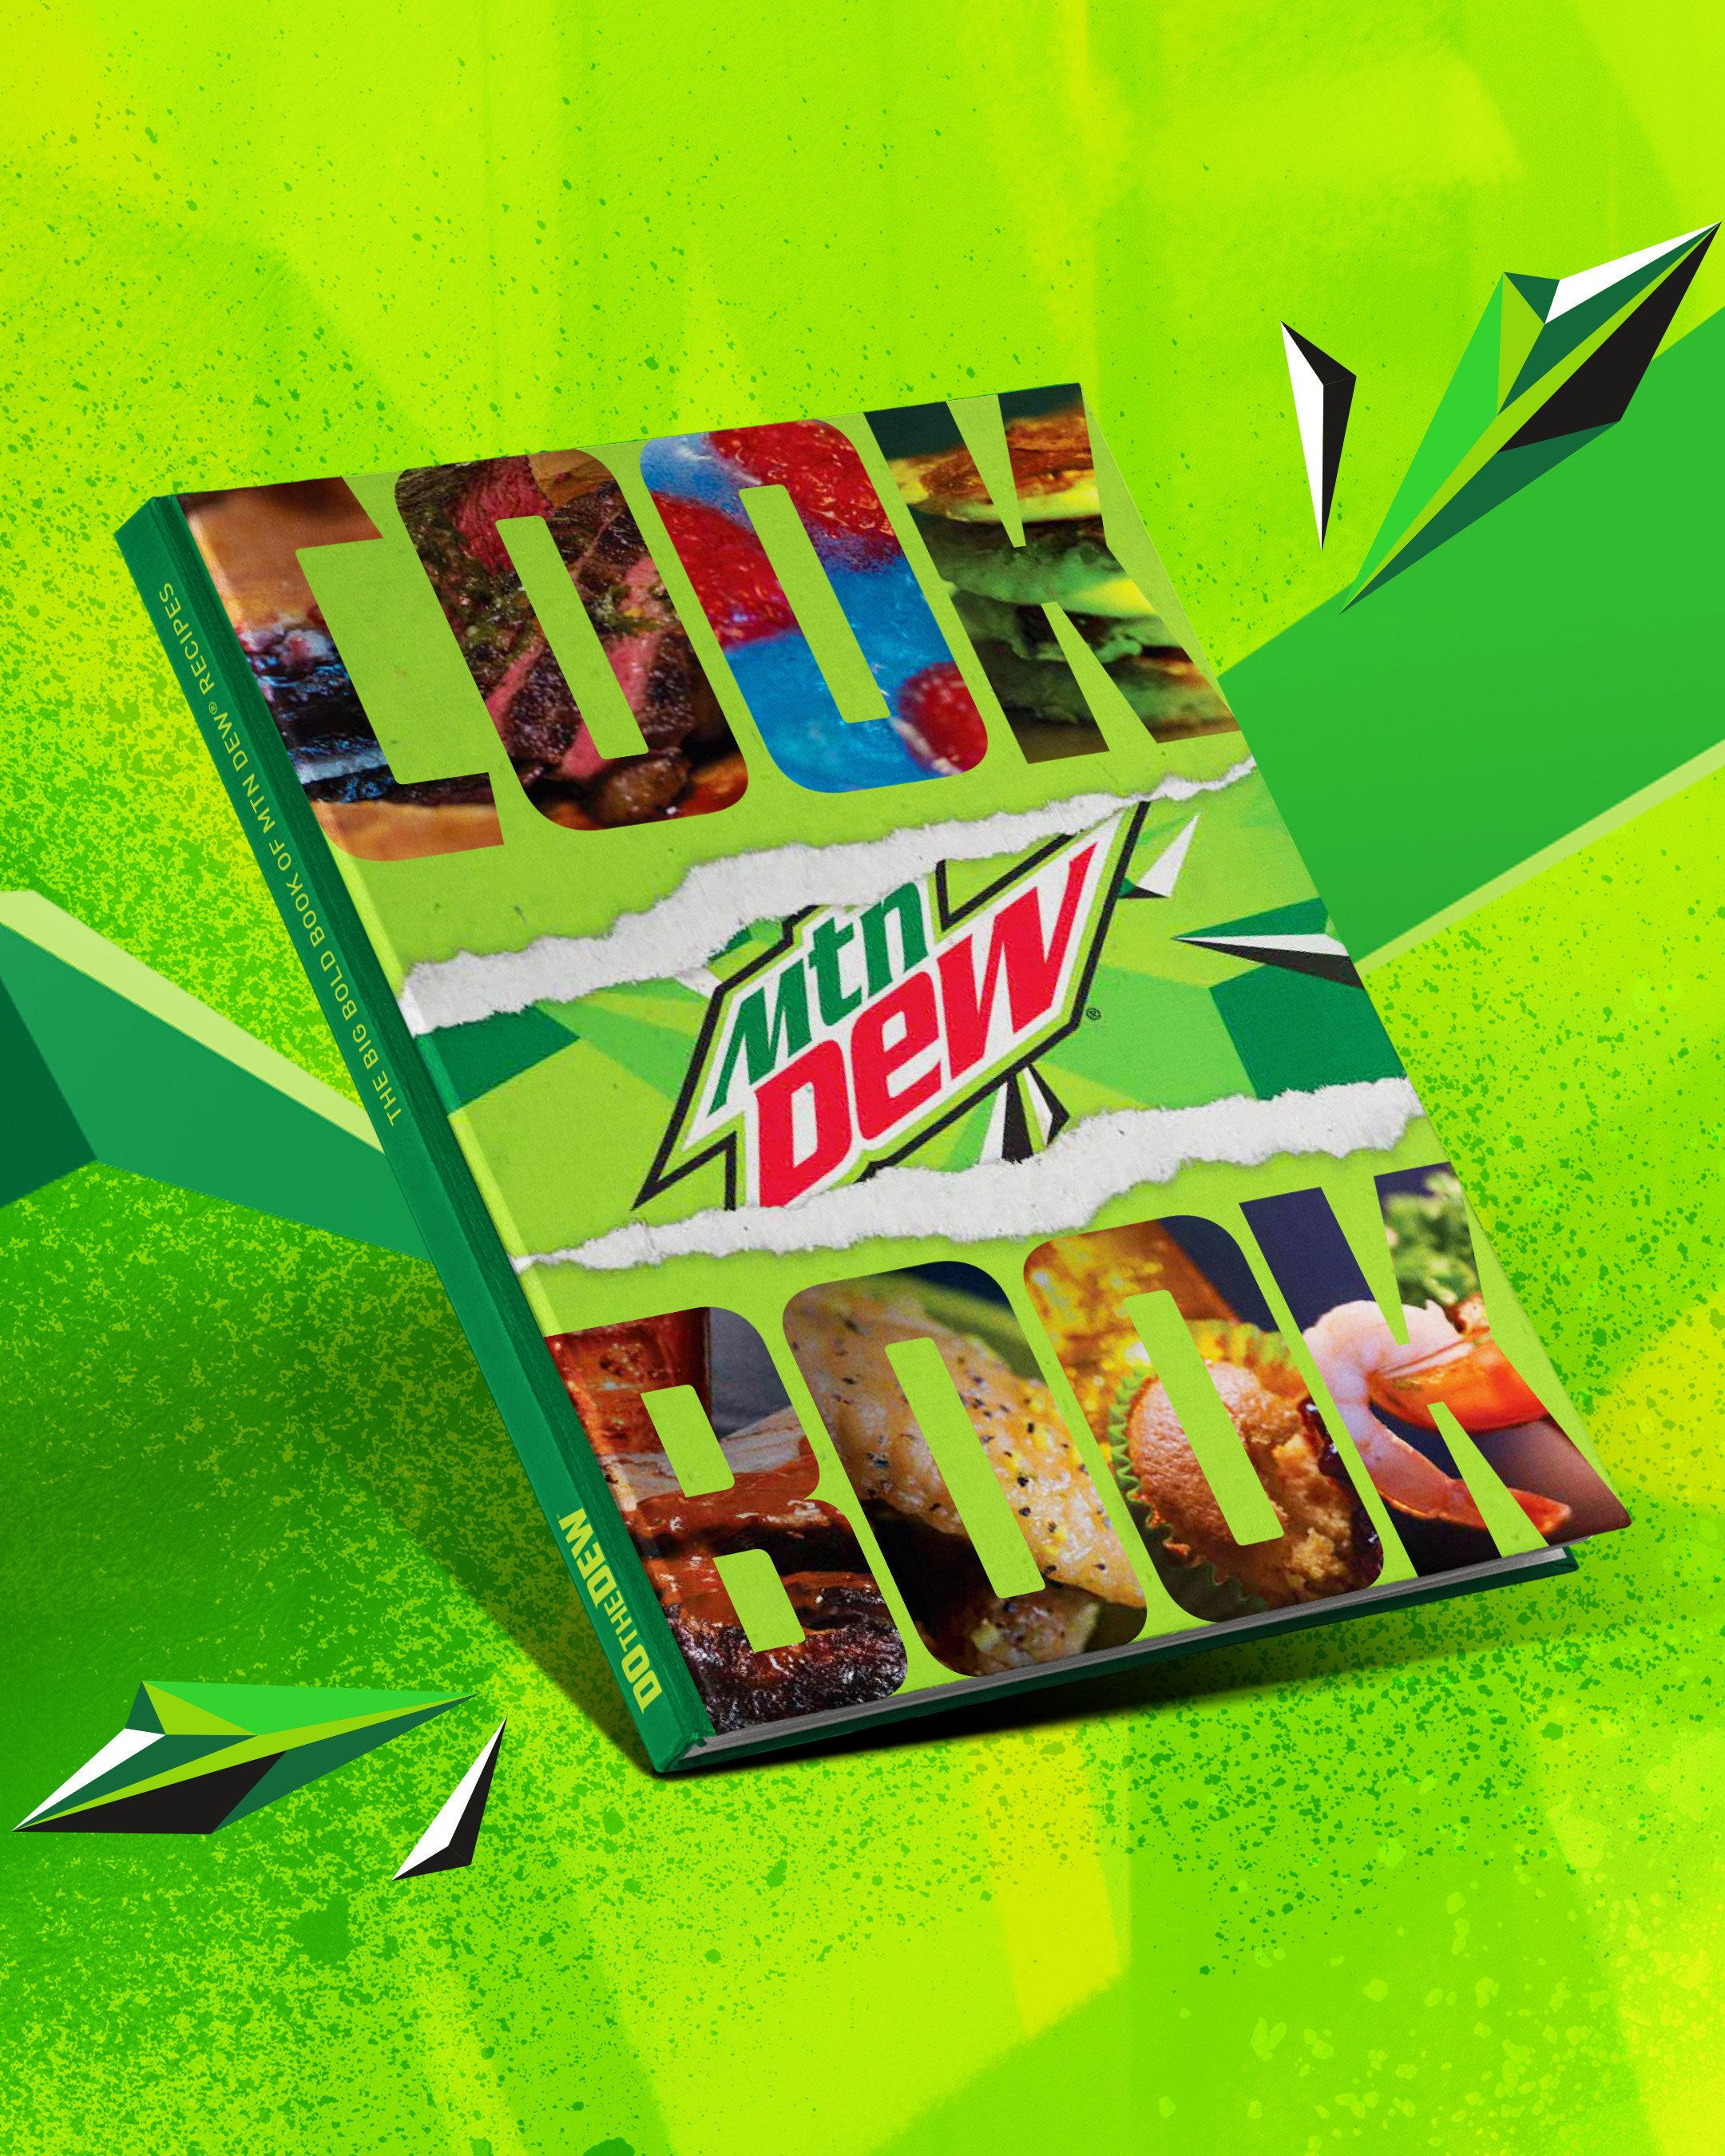 Mountain Dew is releasing a cookbook with lemon lime-infused recipes for every meal